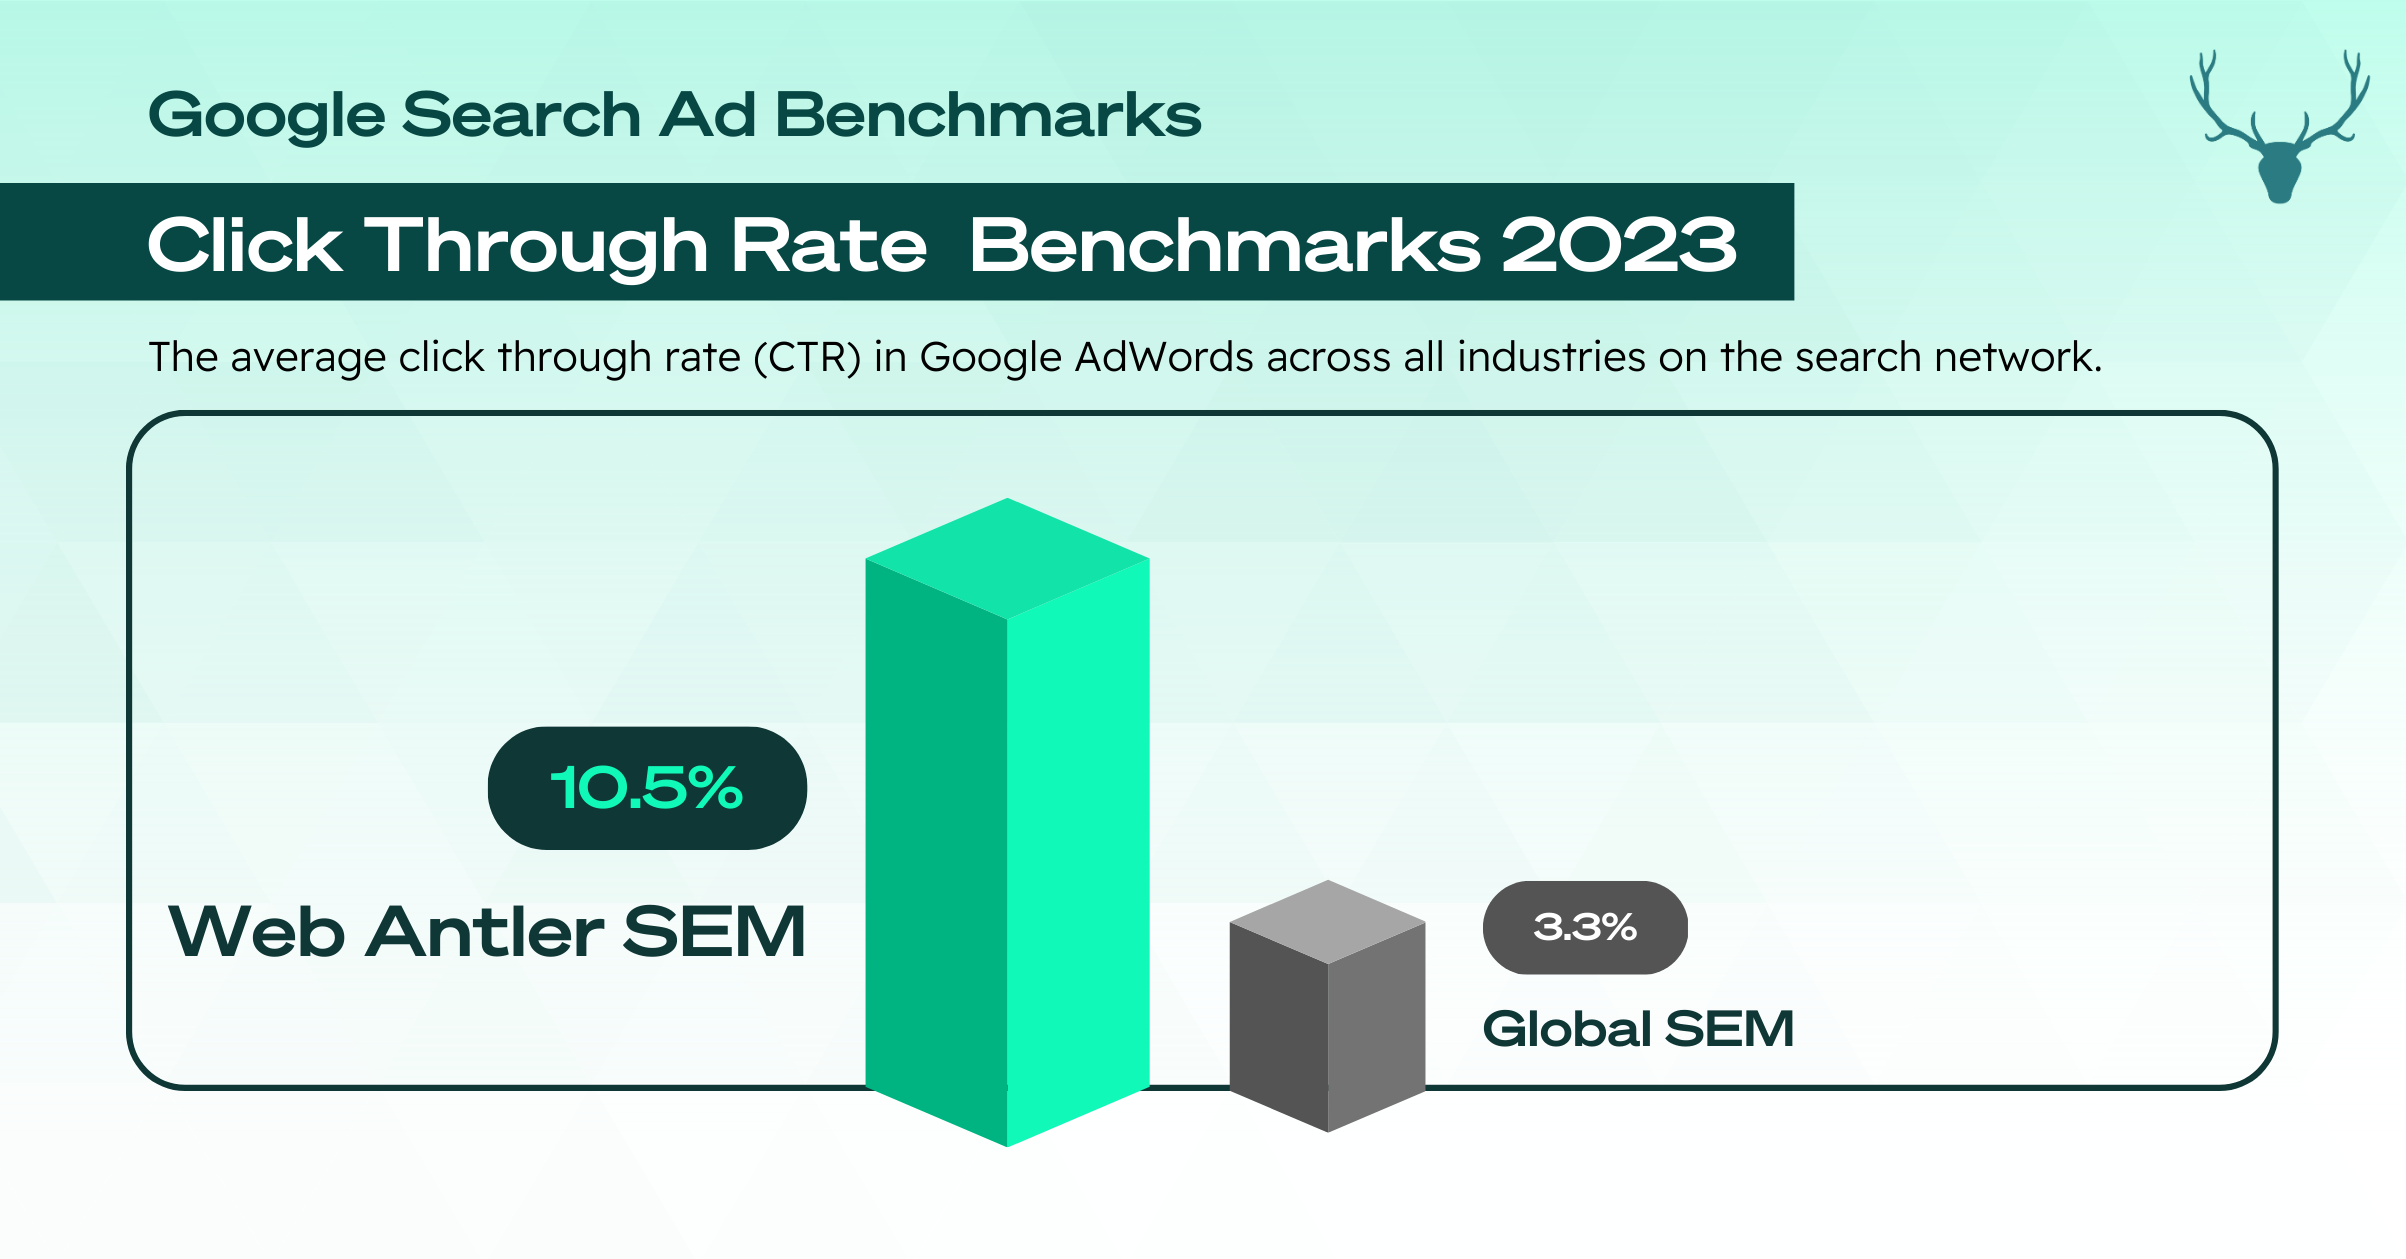 Google Search Ad Benchmarks for New Zealand 2023